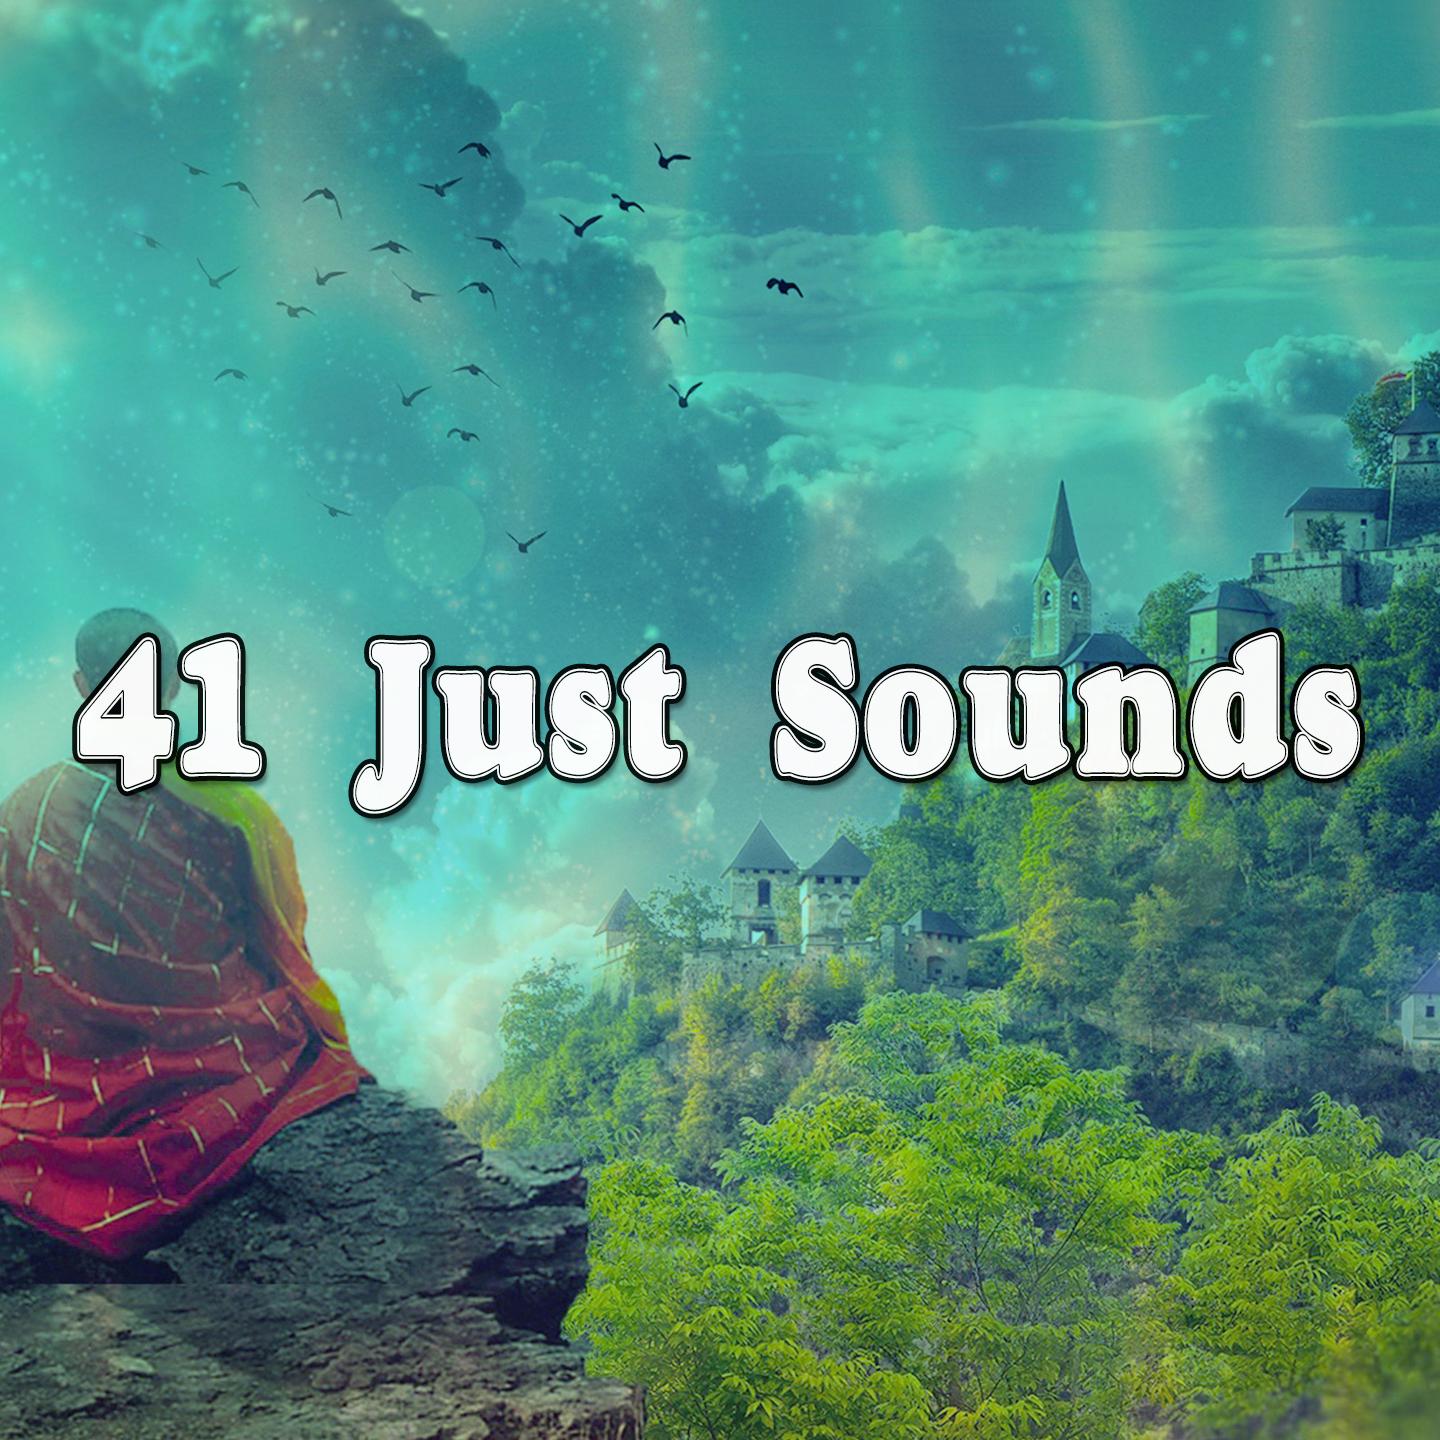 41 Just Sounds